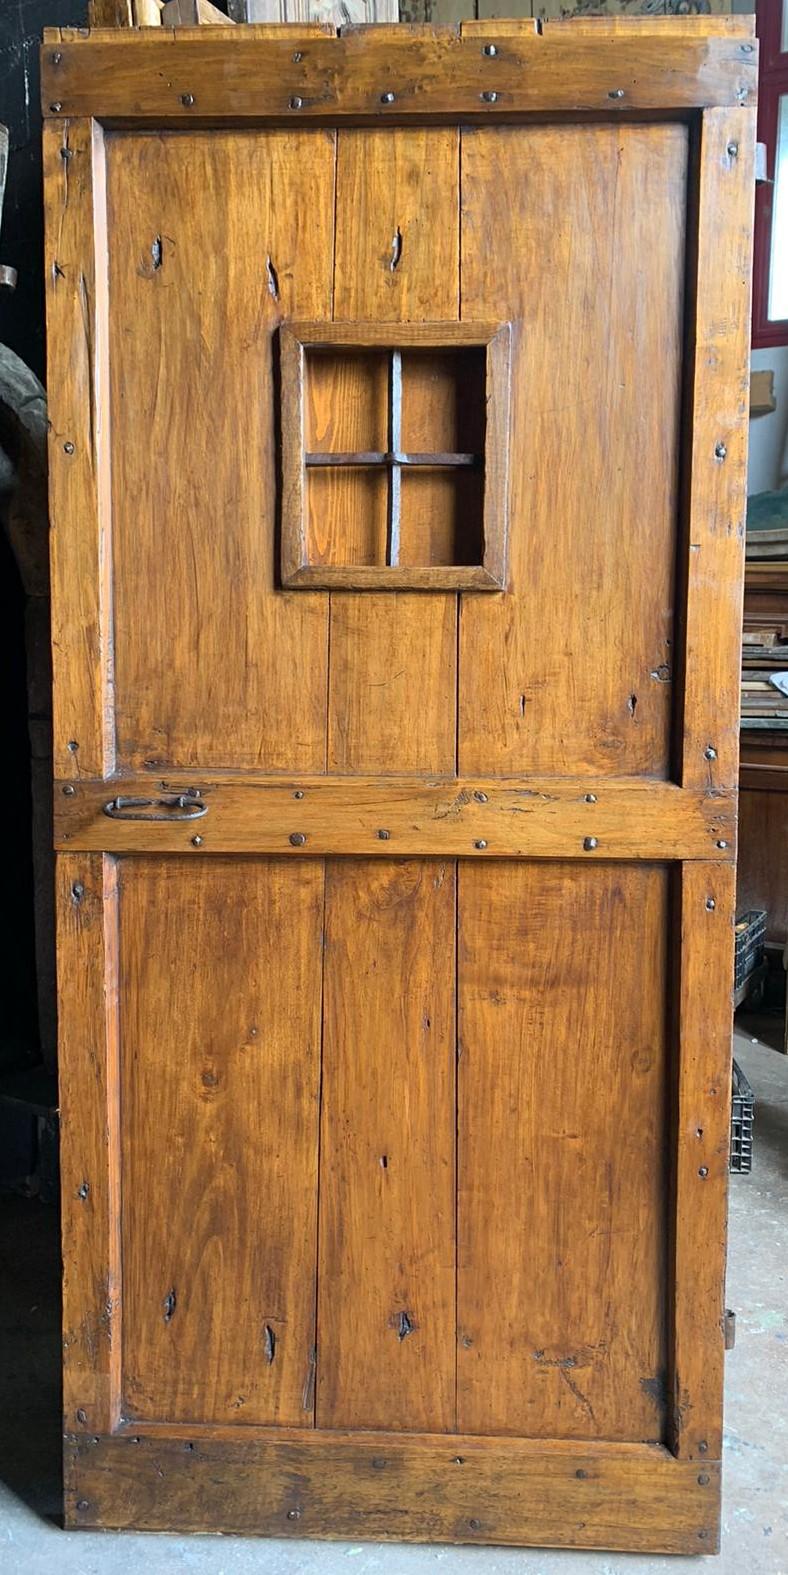 Ancient rustic door with nails, hand-built in solid poplar wood, still maintains the original window and irons, has a right-hand push opening, smooth on the back and without frame (it was mounted on the wall), hand-built in the late 19th century par